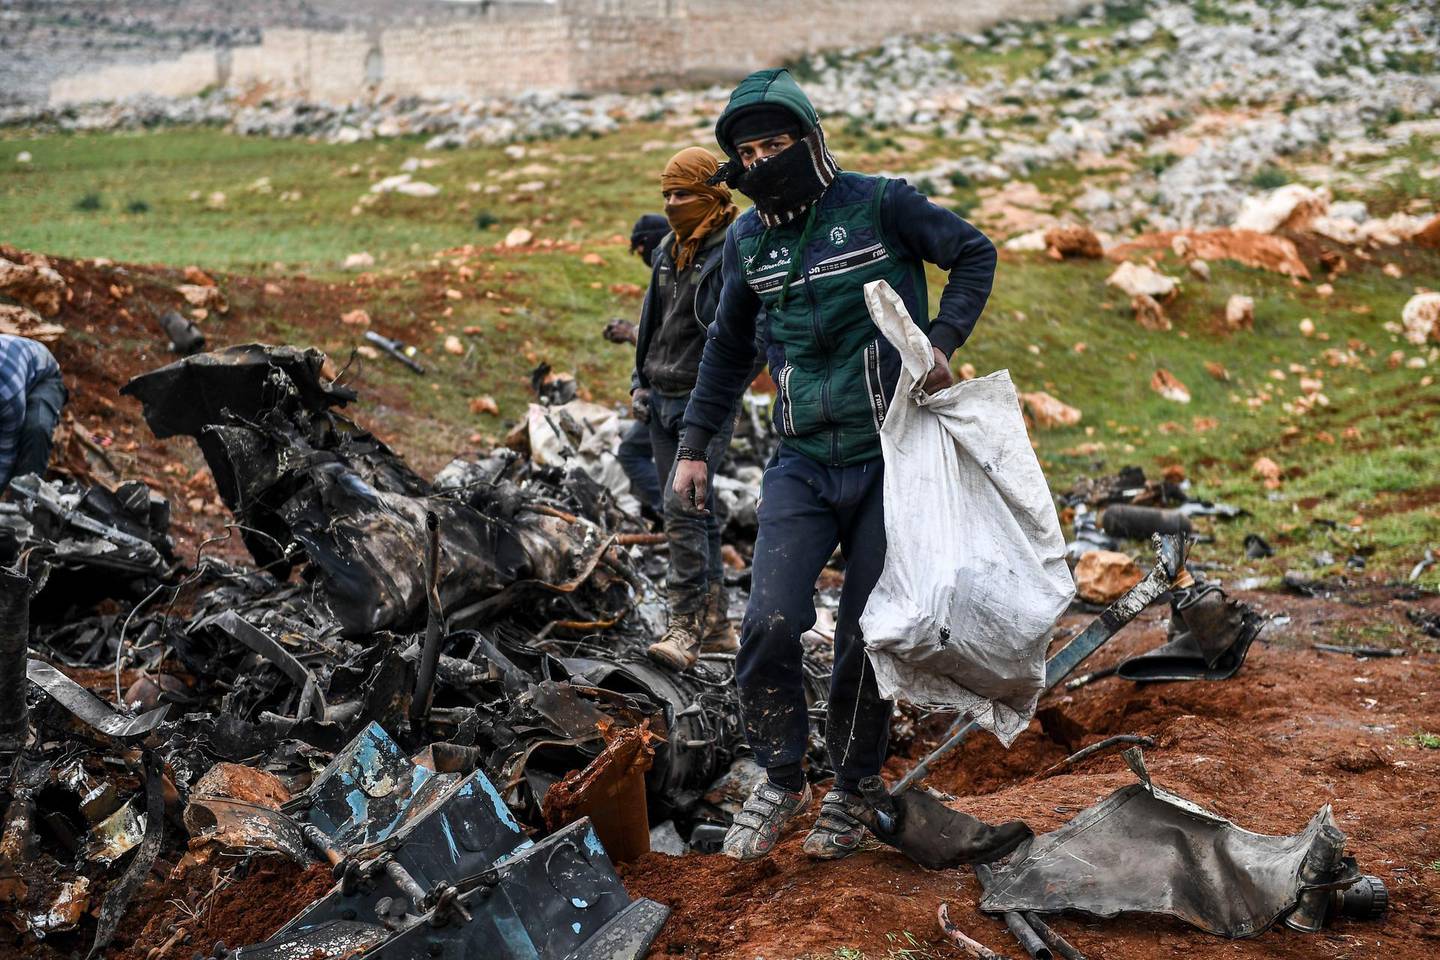 Syrians gather around the wreckage of a government military helicopter that was shot down Friday, in the countryside outside Idlib, Syria, Saturday, Feb. 15, 2020. Syrian troops are waging an offensive in the last rebel stronghold. (AP Photo)